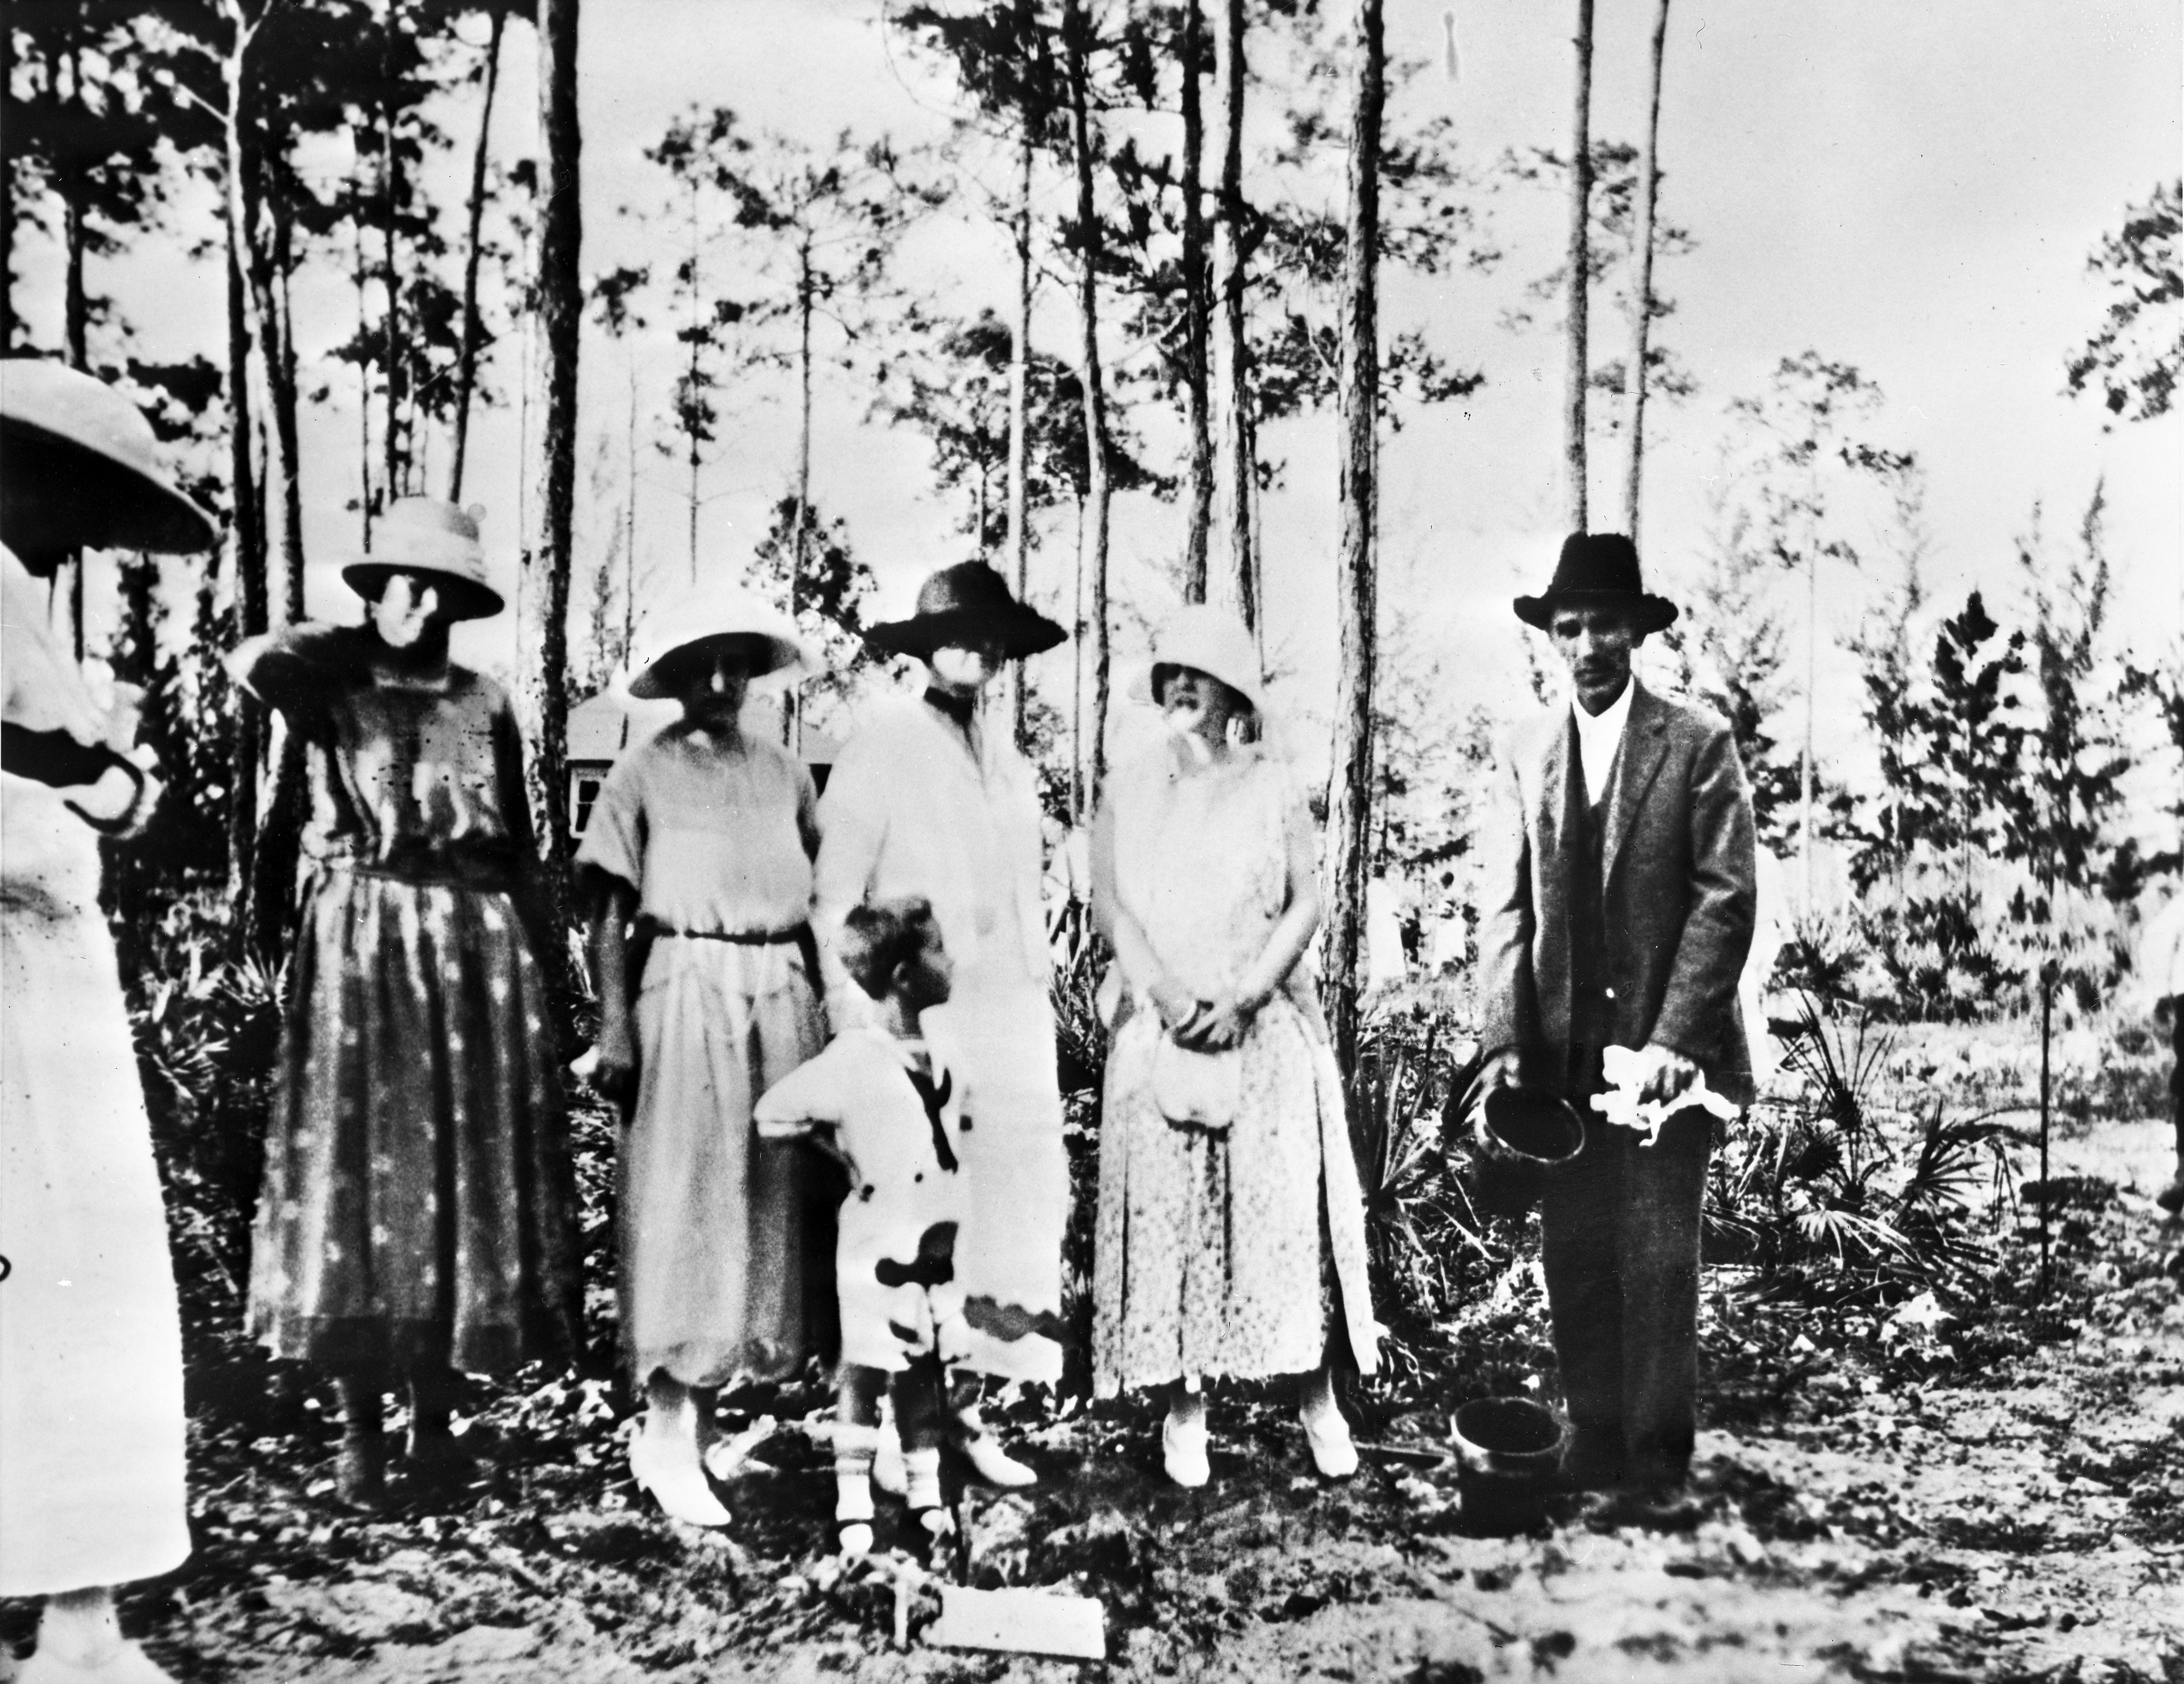 Marjory (third woman from the left) plants trees in Miami with the Women’s Club, circa 1930